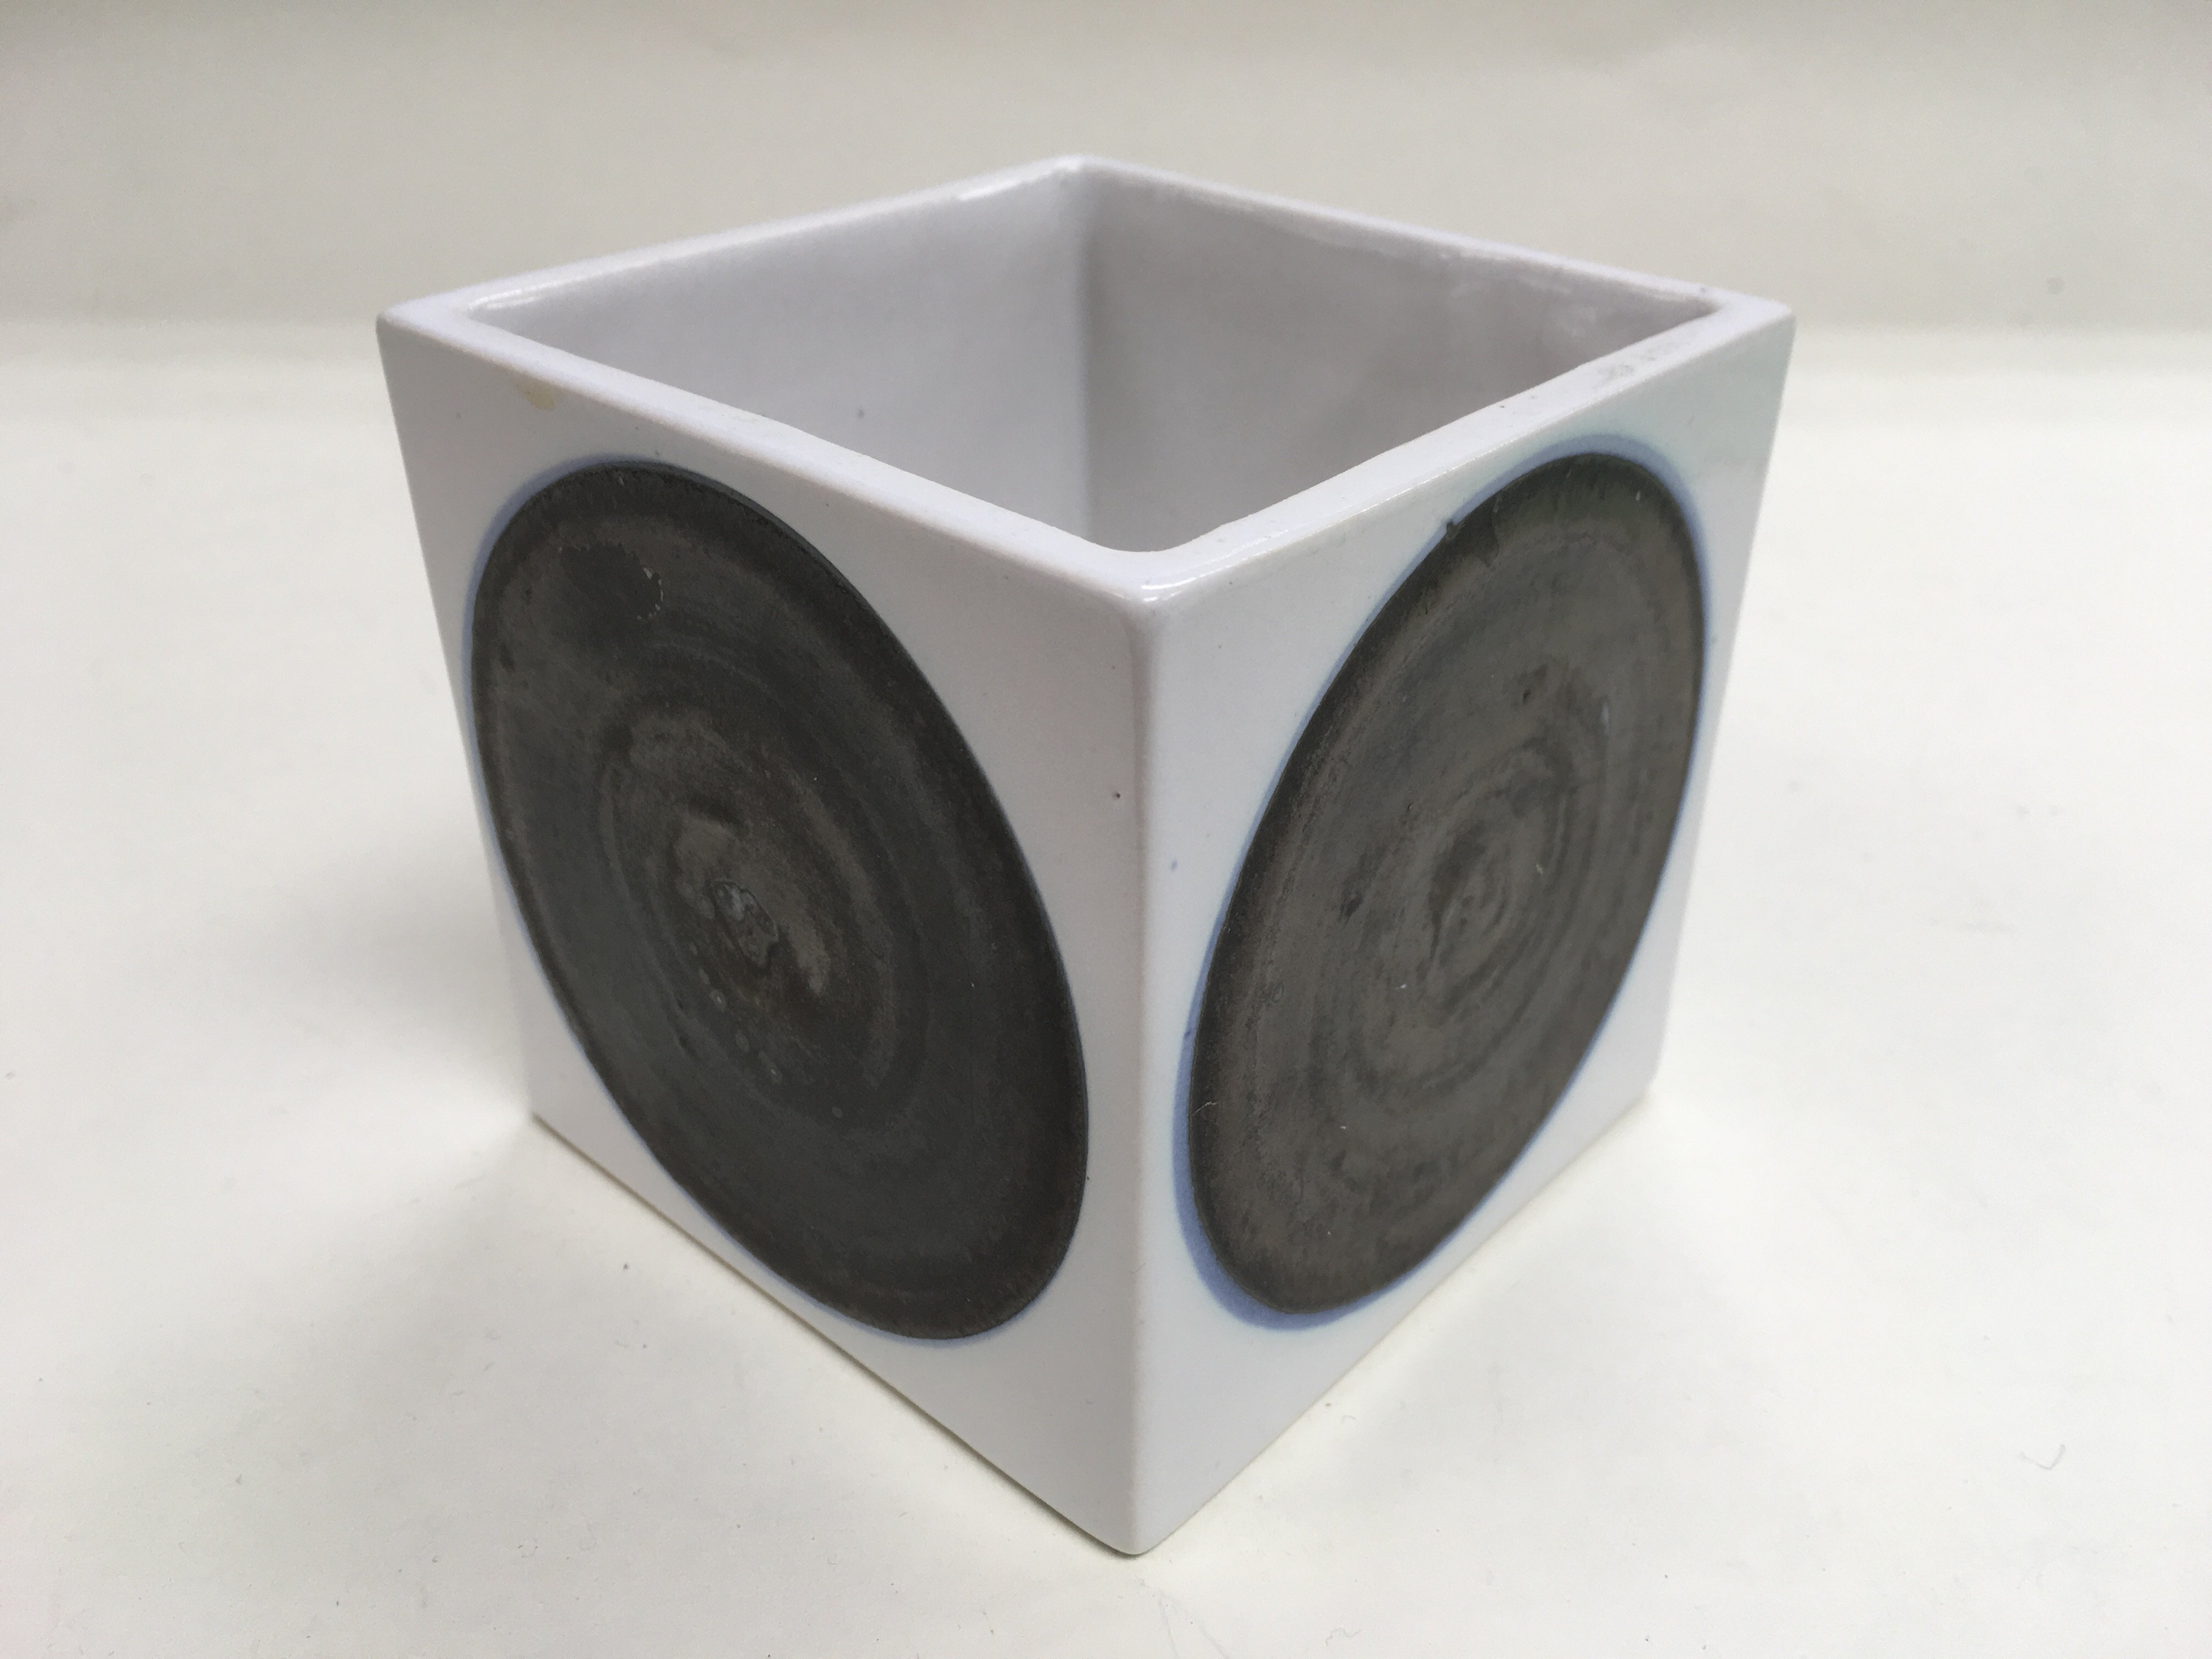 A Troika cube vase with black circular decoration